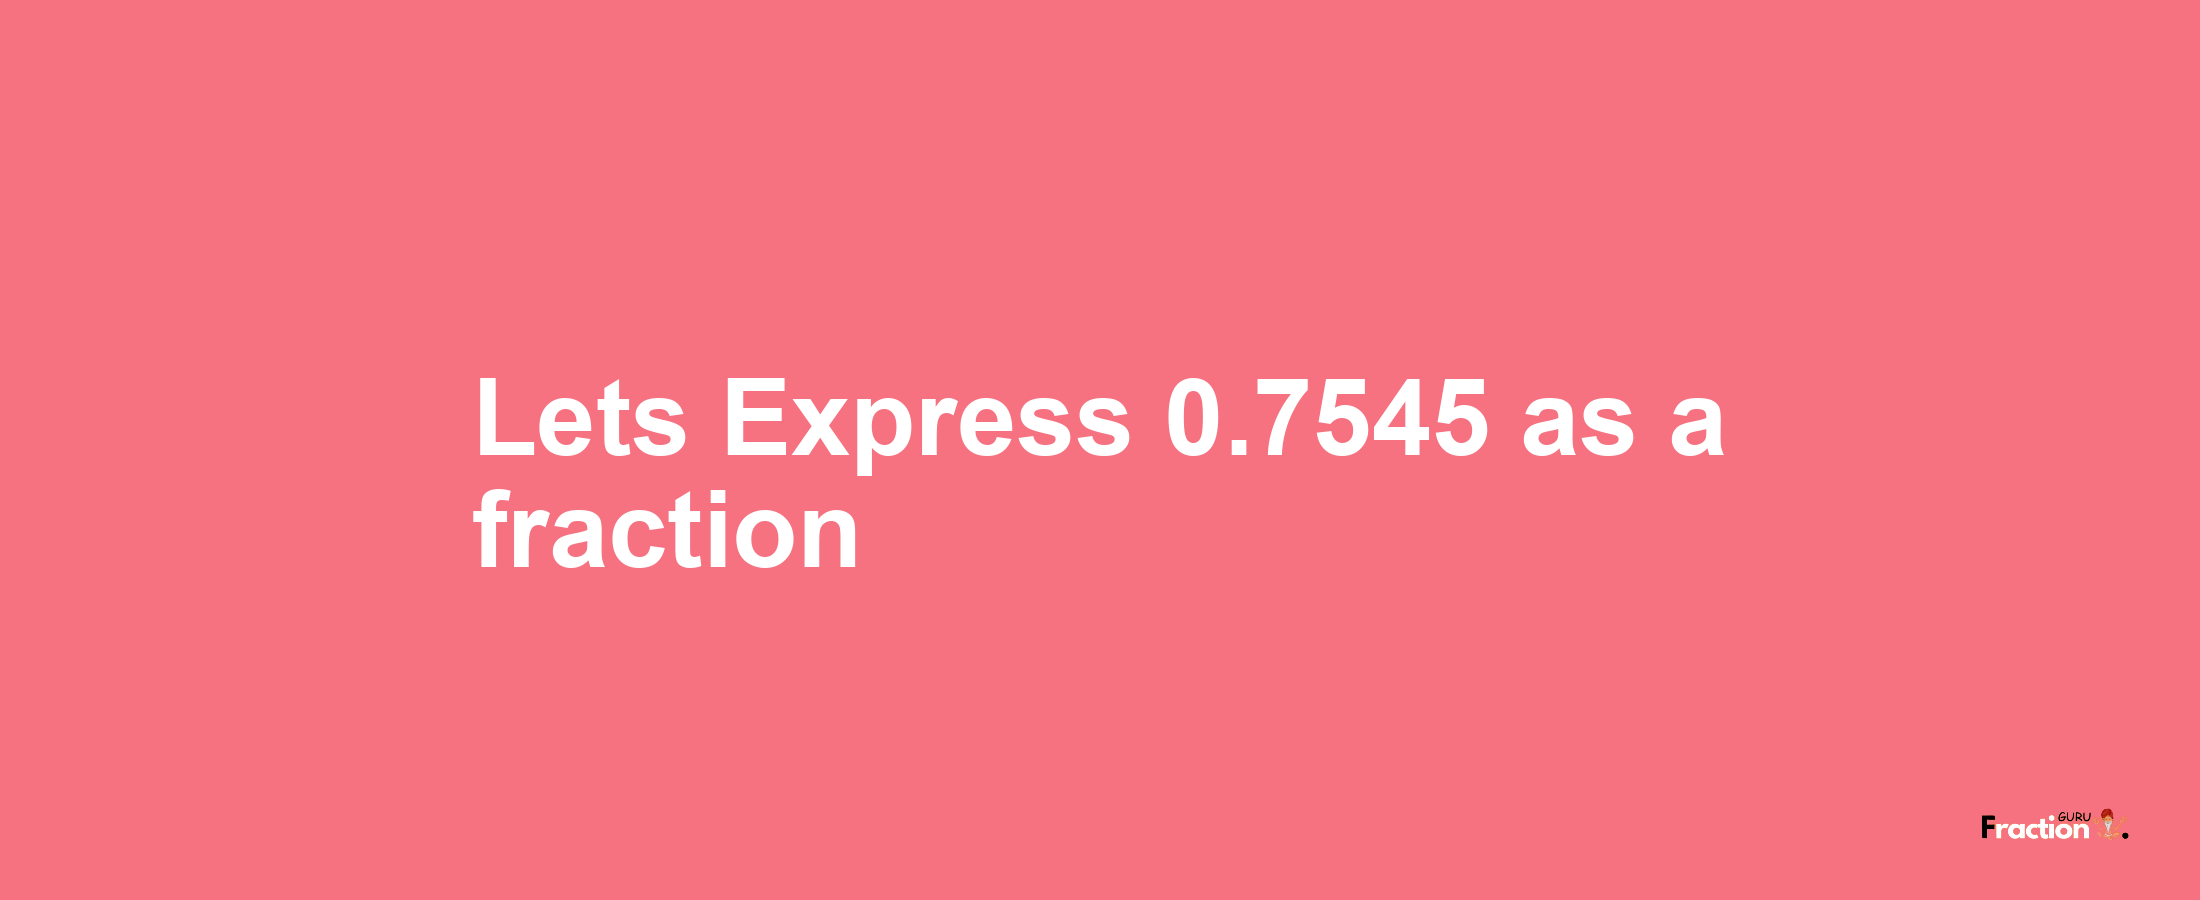 Lets Express 0.7545 as afraction